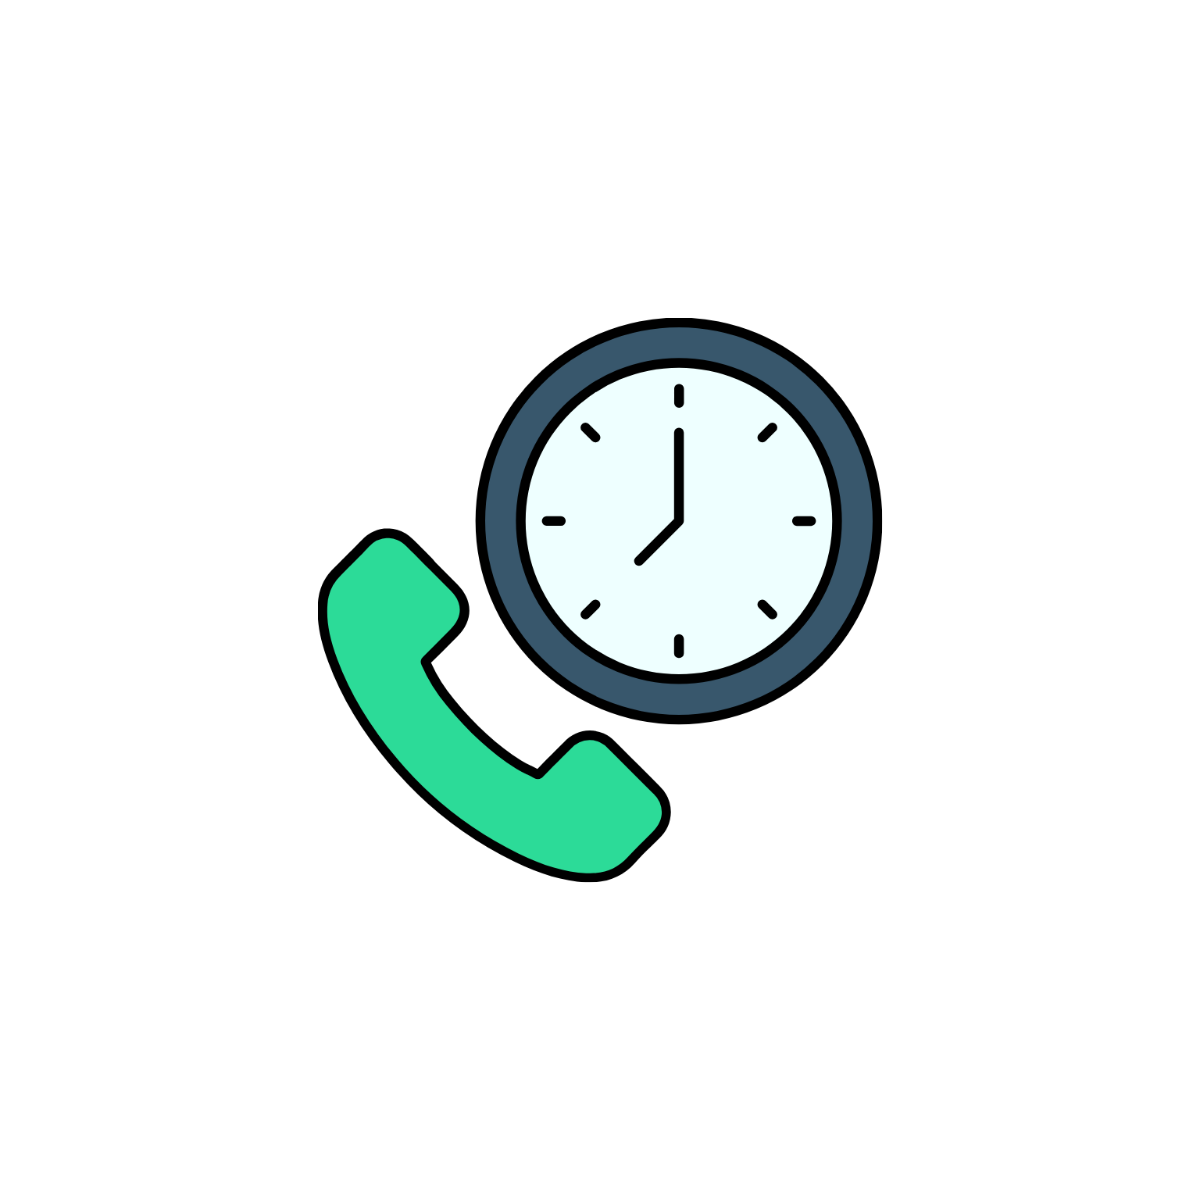 Call Time Icon